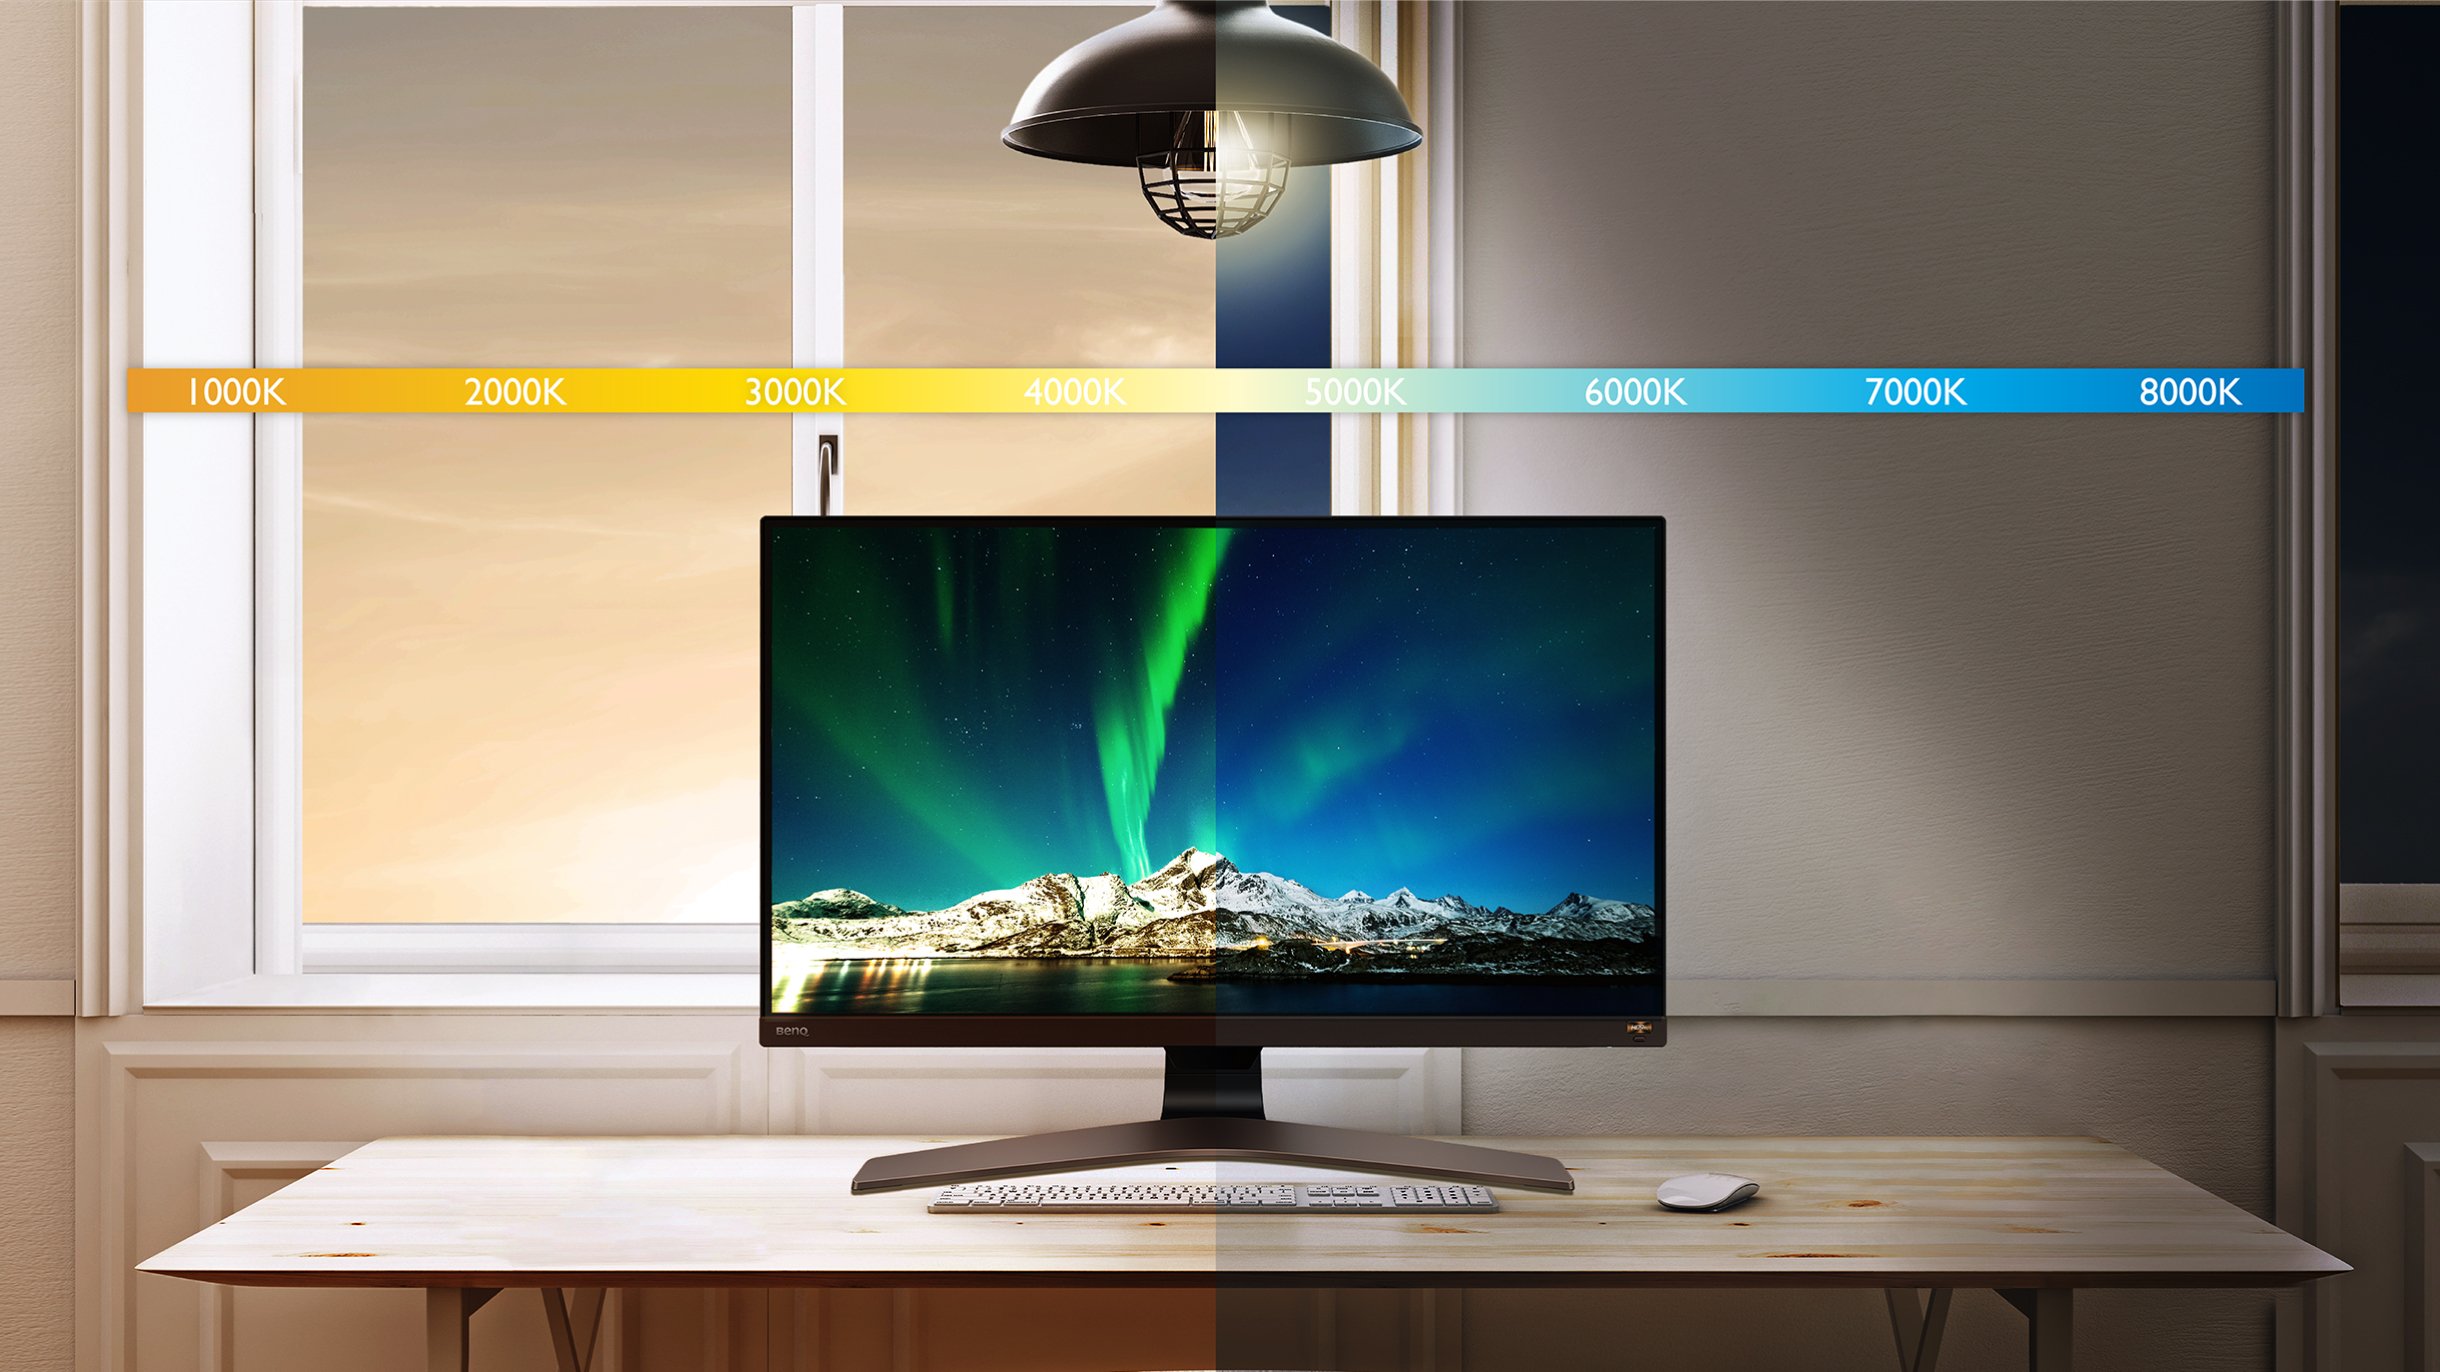 Brightness Intelligence Plus adjusts display brightness and colour temperature for your most comfortable viewing experience